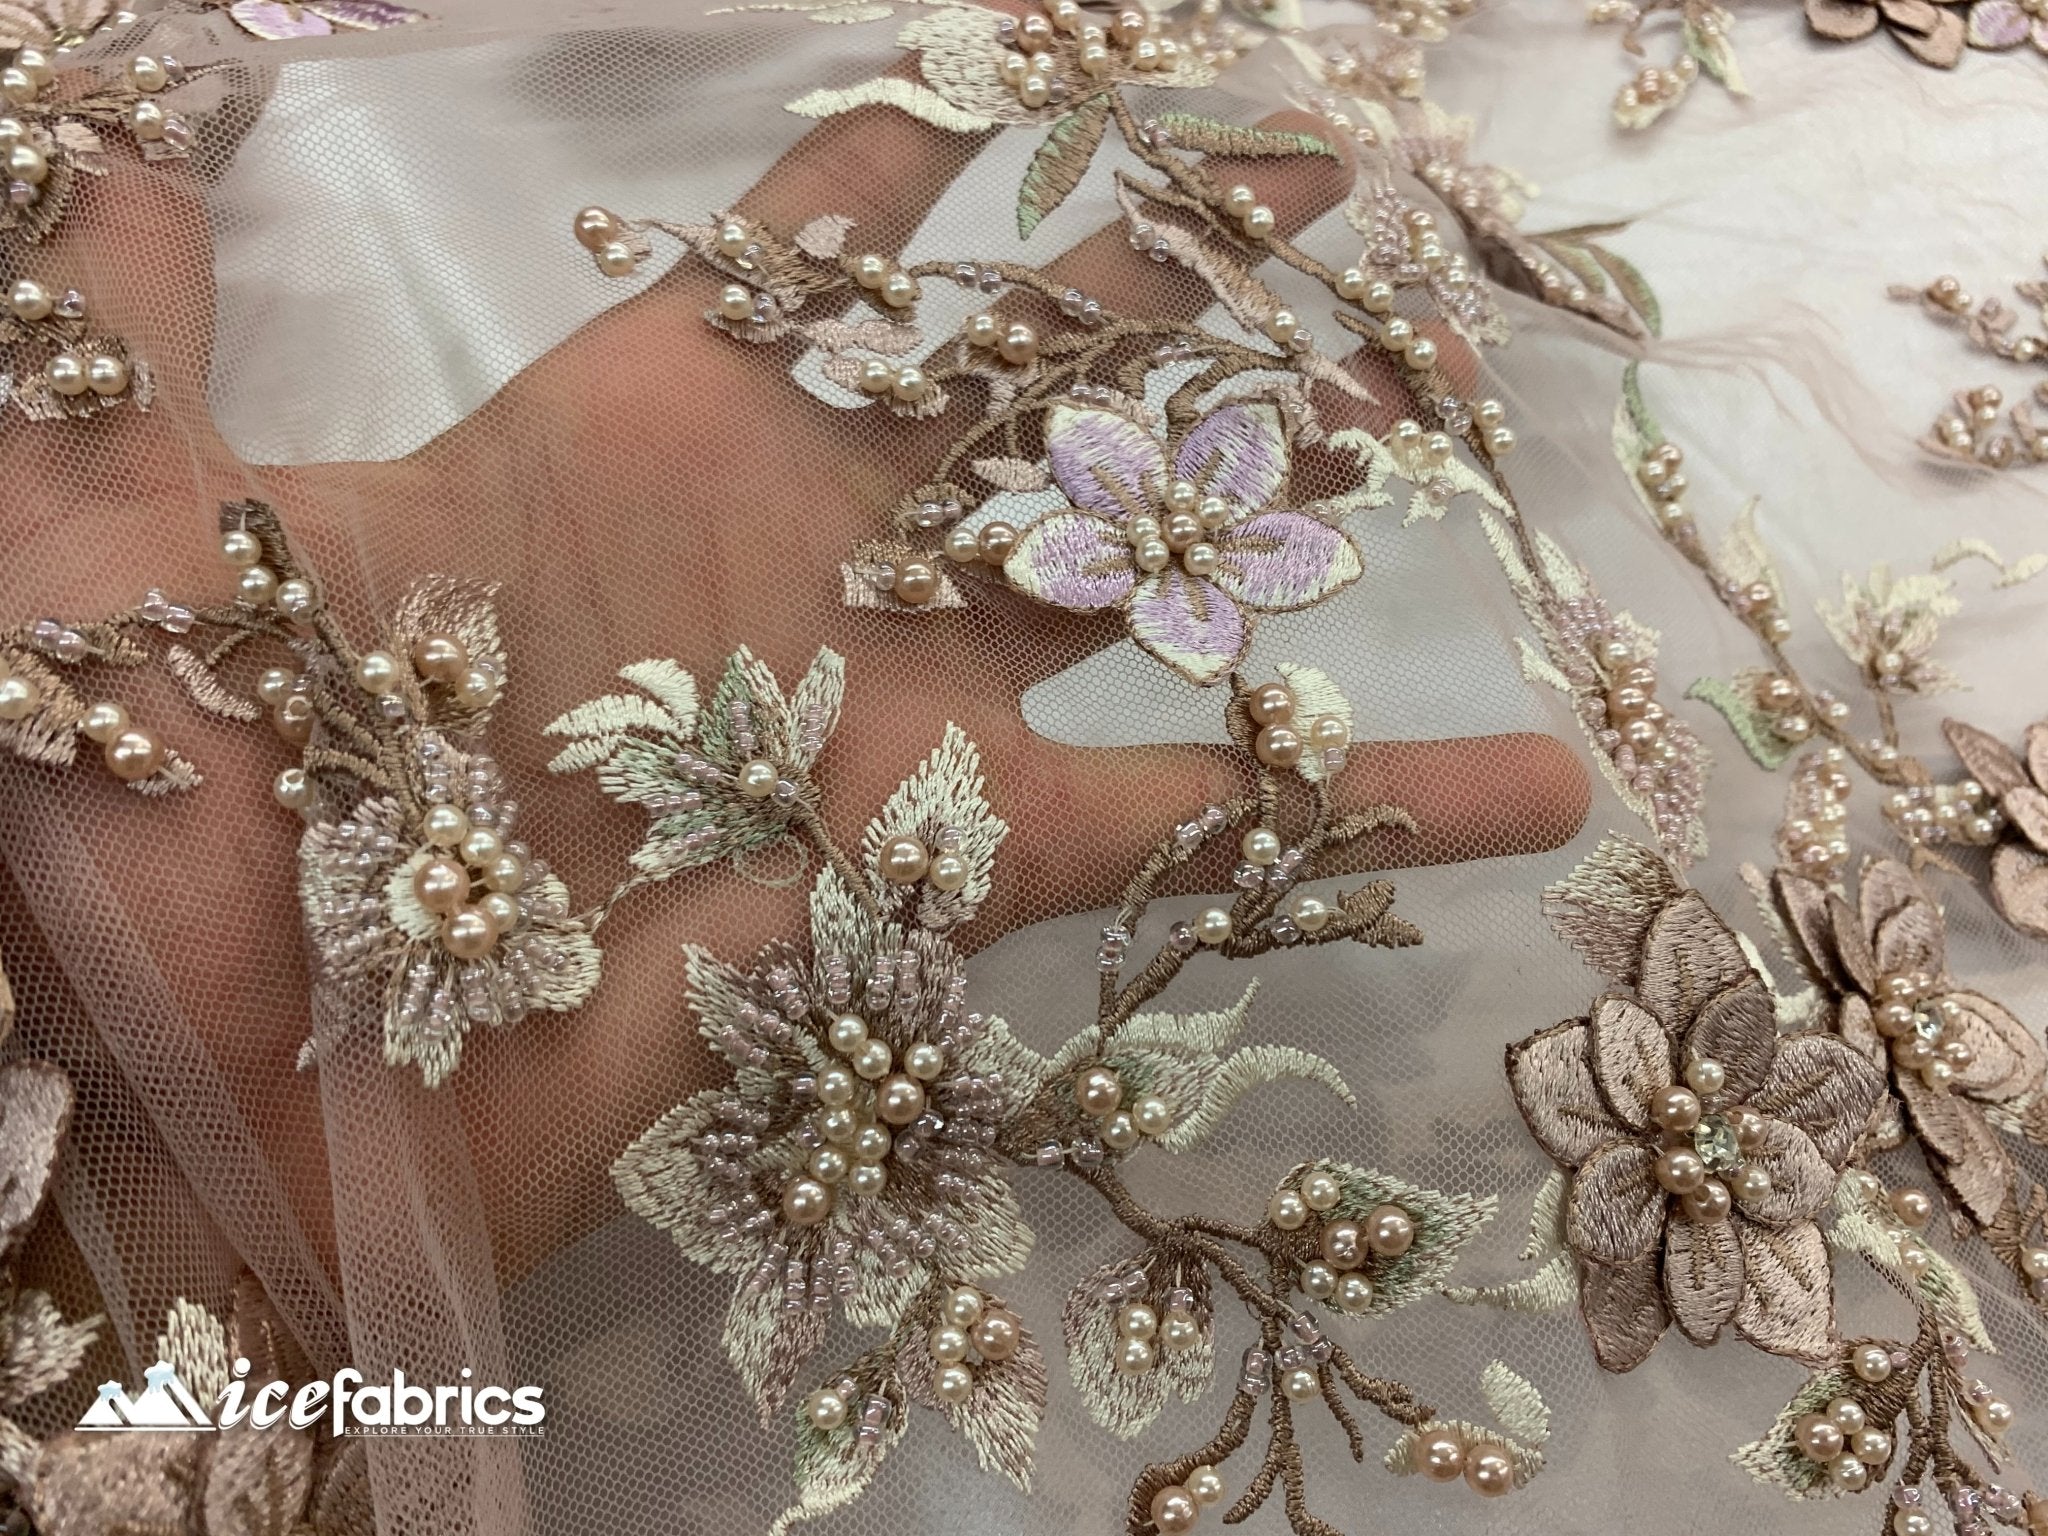 Flowers Embroidered Beaded Fabric/ Mesh Lace Fabric/ Bridal Fabric/ICE FABRICSICE FABRICSRose GoldFlowers Embroidered Beaded Fabric/ Mesh Lace Fabric/ Bridal Fabric/ ICE FABRICS Rose Gold